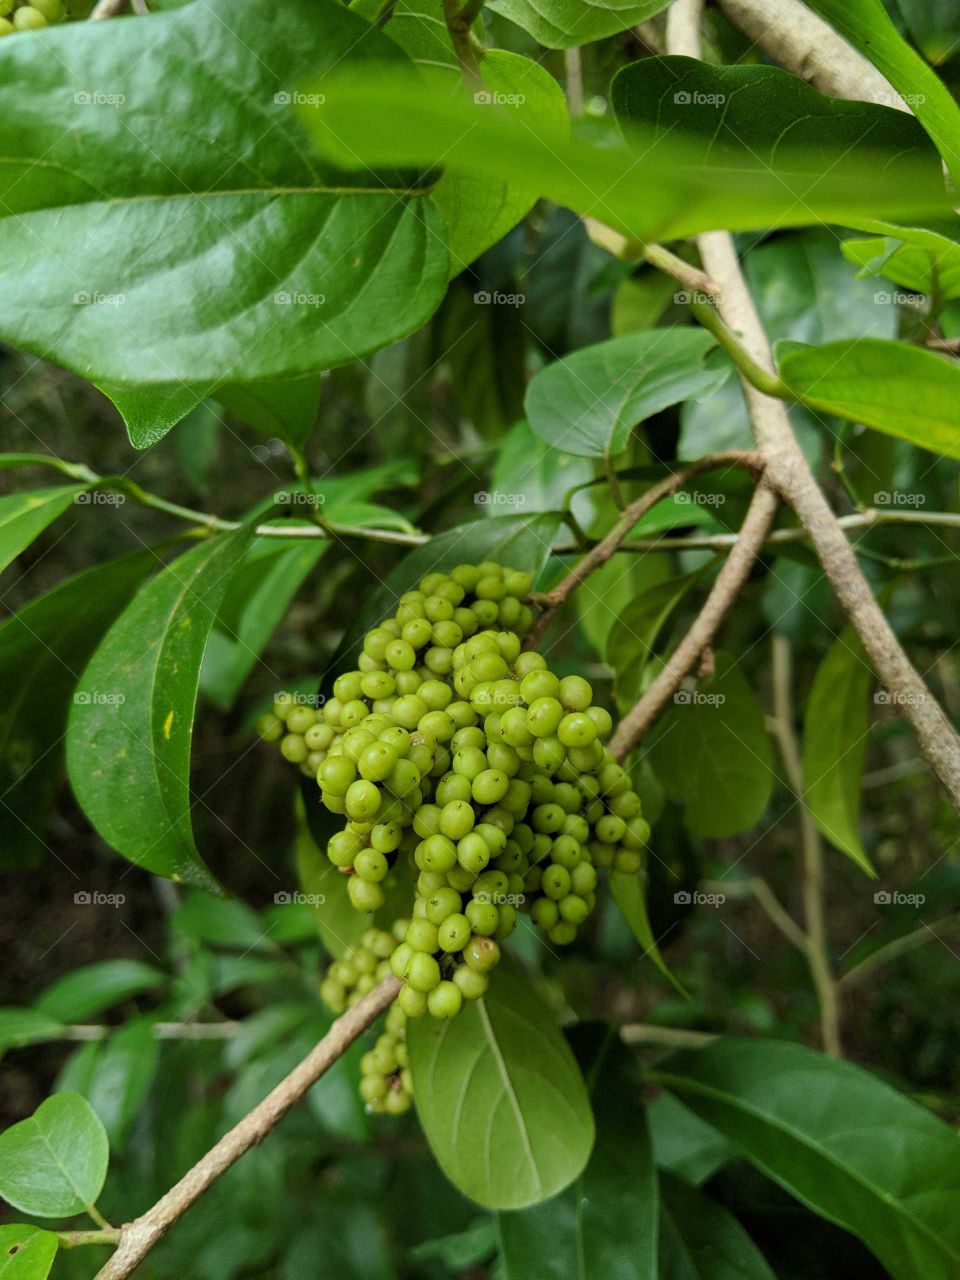 We call this an ilam. It grows in the wild and has sour taste when green but becomes sweet and tangy when ripened. It turns purple when ripe.